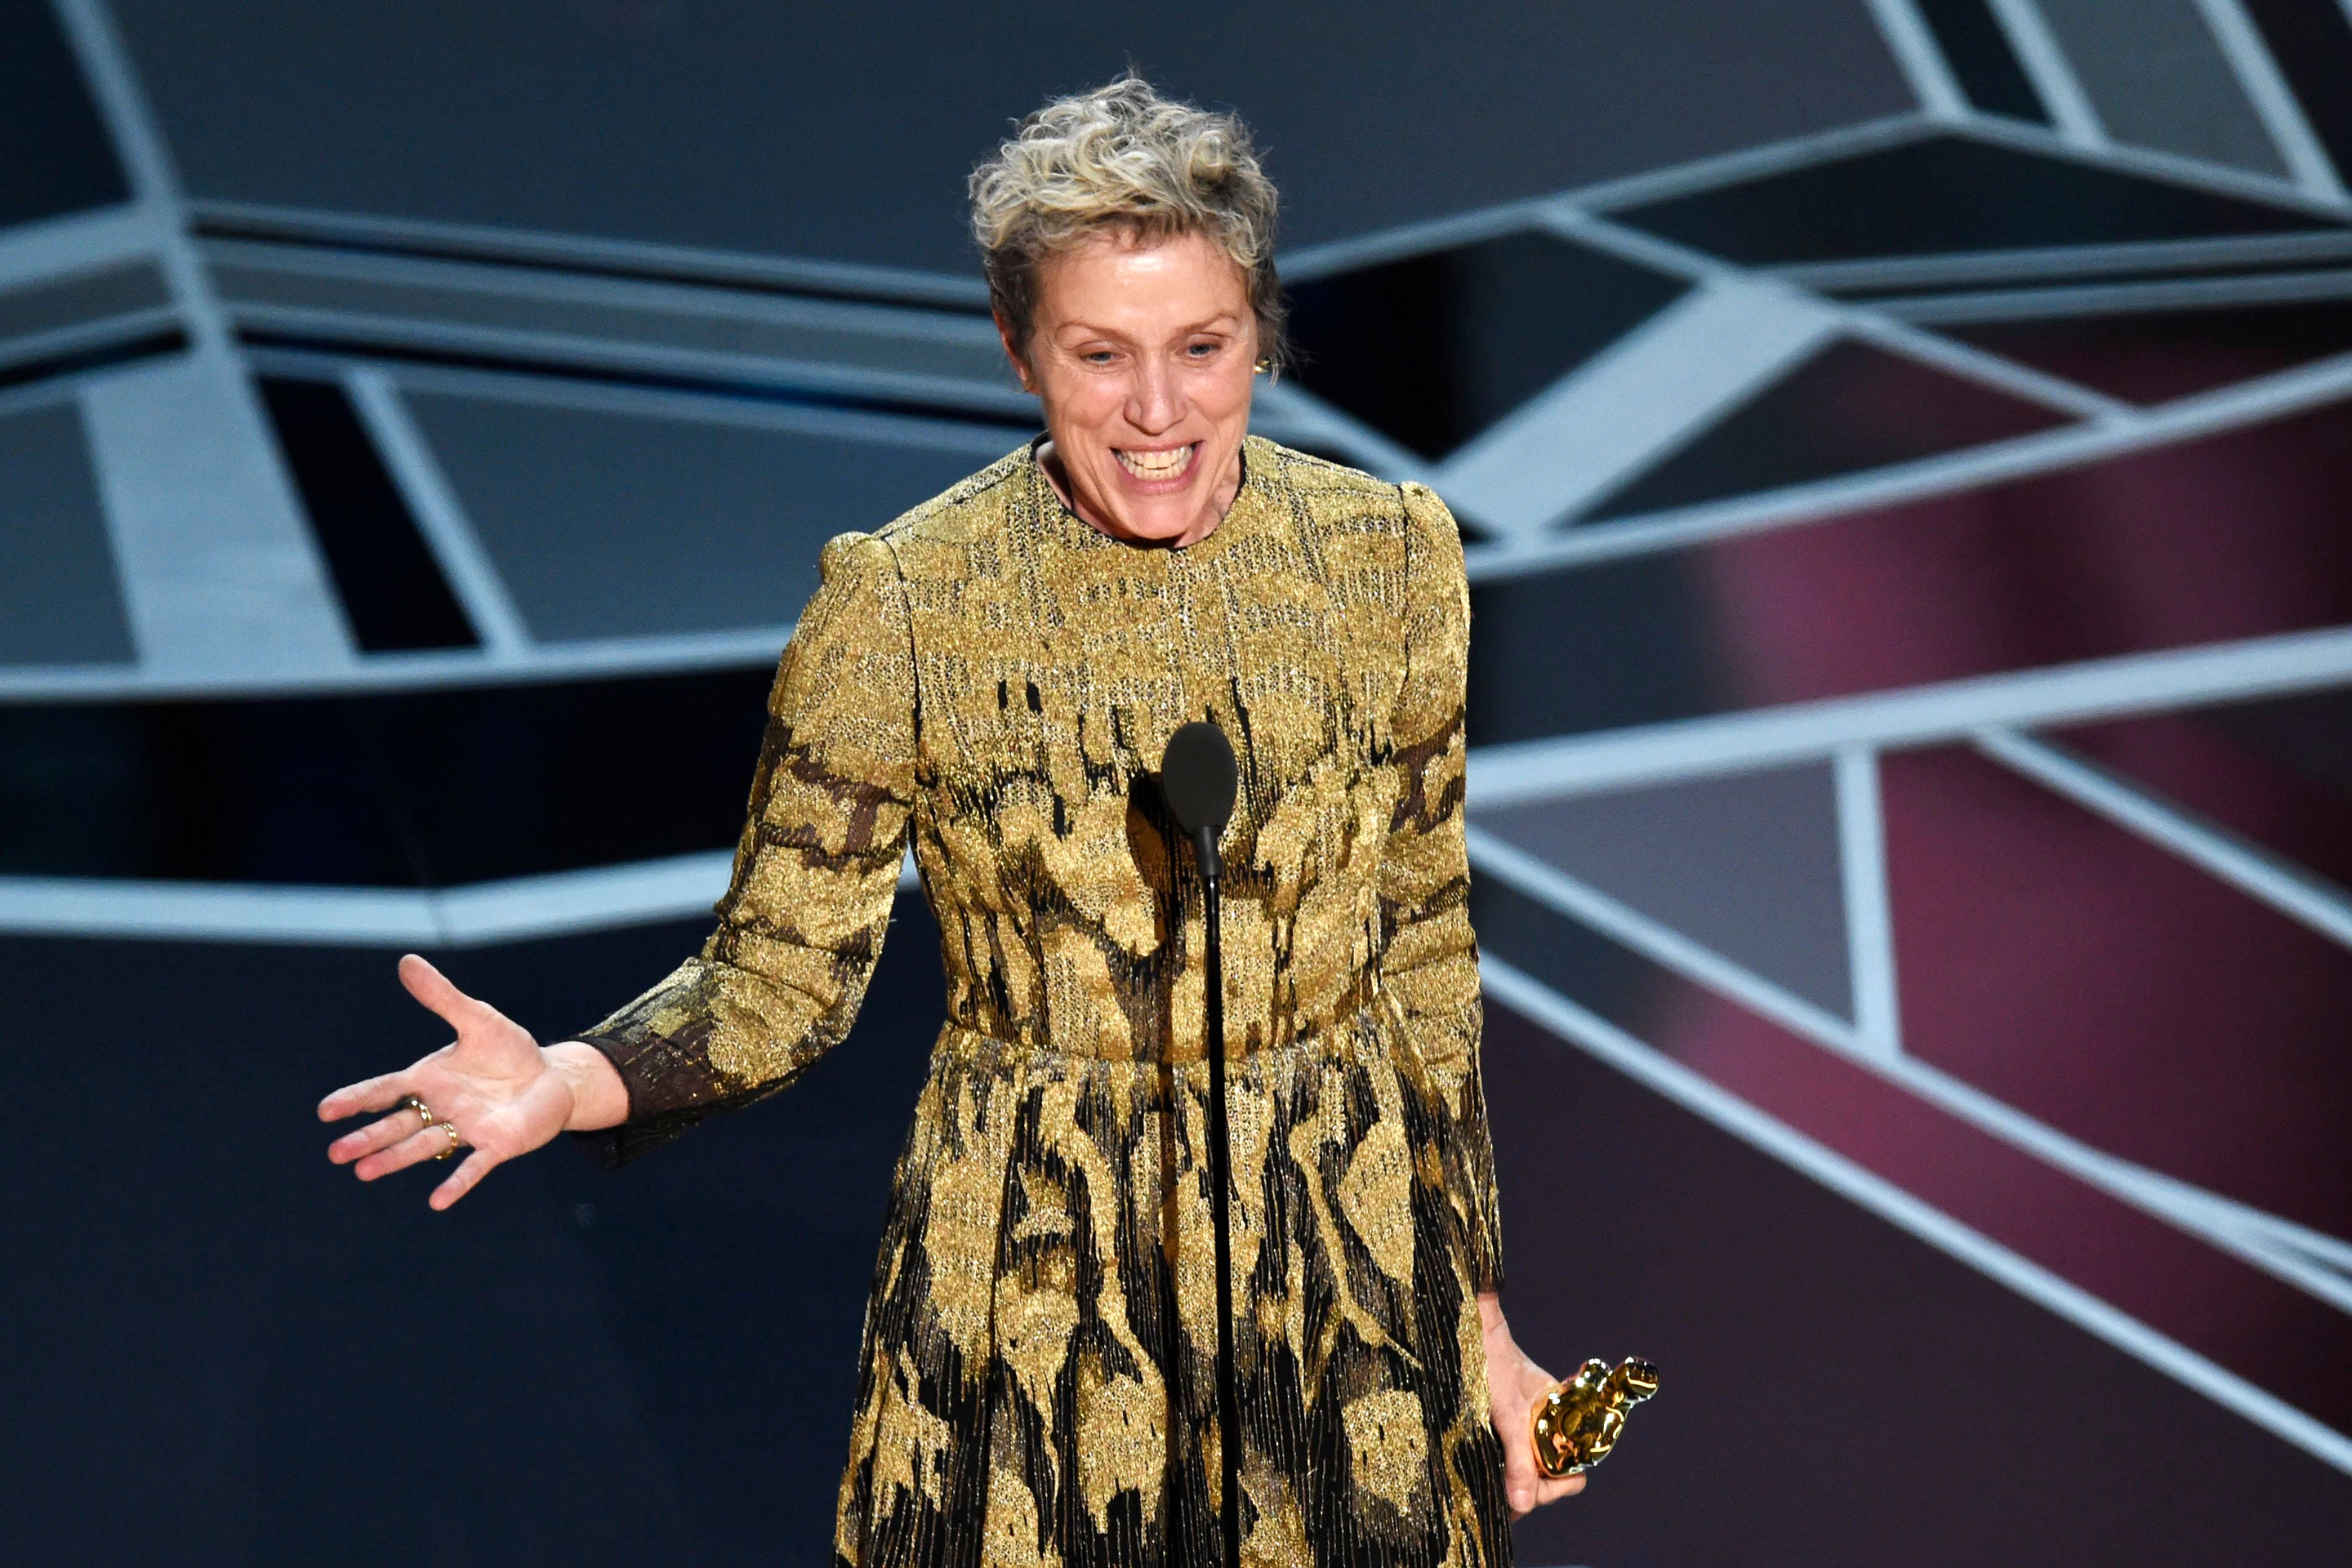 How Frances McDormand’s Oscar Speech ‘Super-Charged’ a Significant Change in Hollywood Over the Last Year